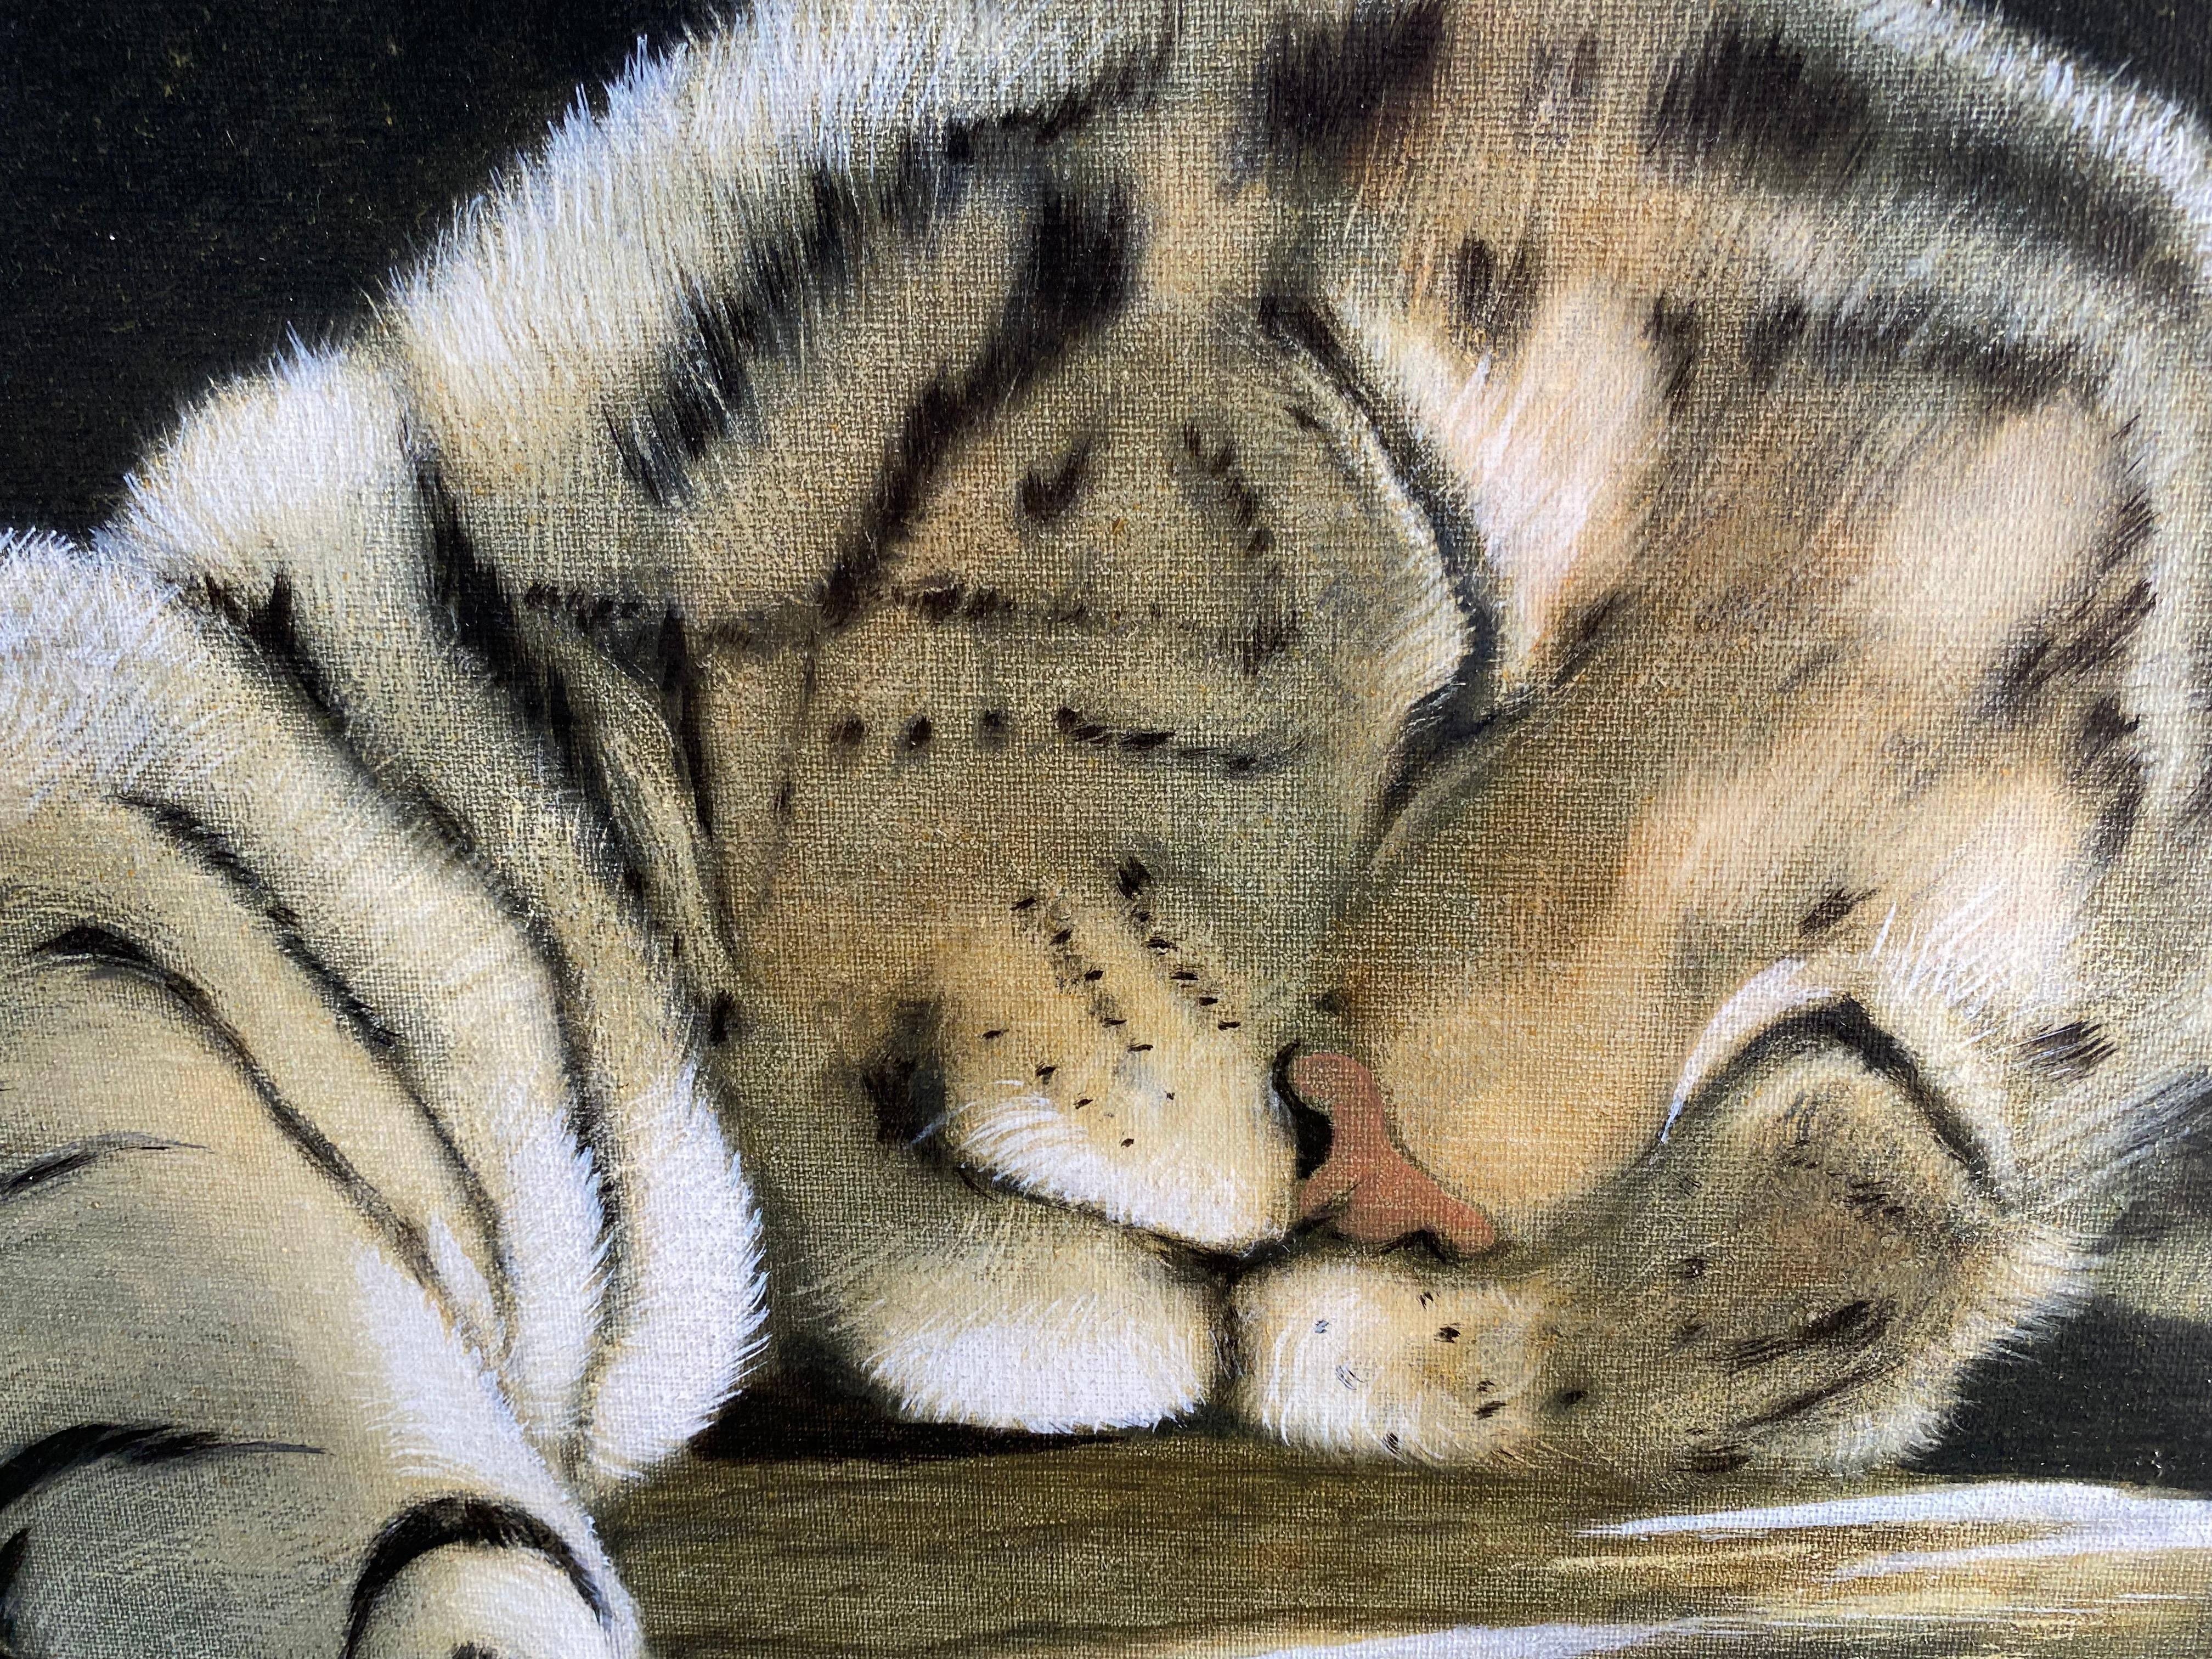 André Ferrand - The baby tiger 

Oil on canvas
2010
Size 55 x 46 cm 

490€



André Ferrand - The baby tiger 

Oil on canvas
2010
Size 55 x 46 cm 

490€
André Ferrand - The baby tiger 

Oil on canvas
2010
Size 55 x 46 cm 

490€

André Ferrand - Le